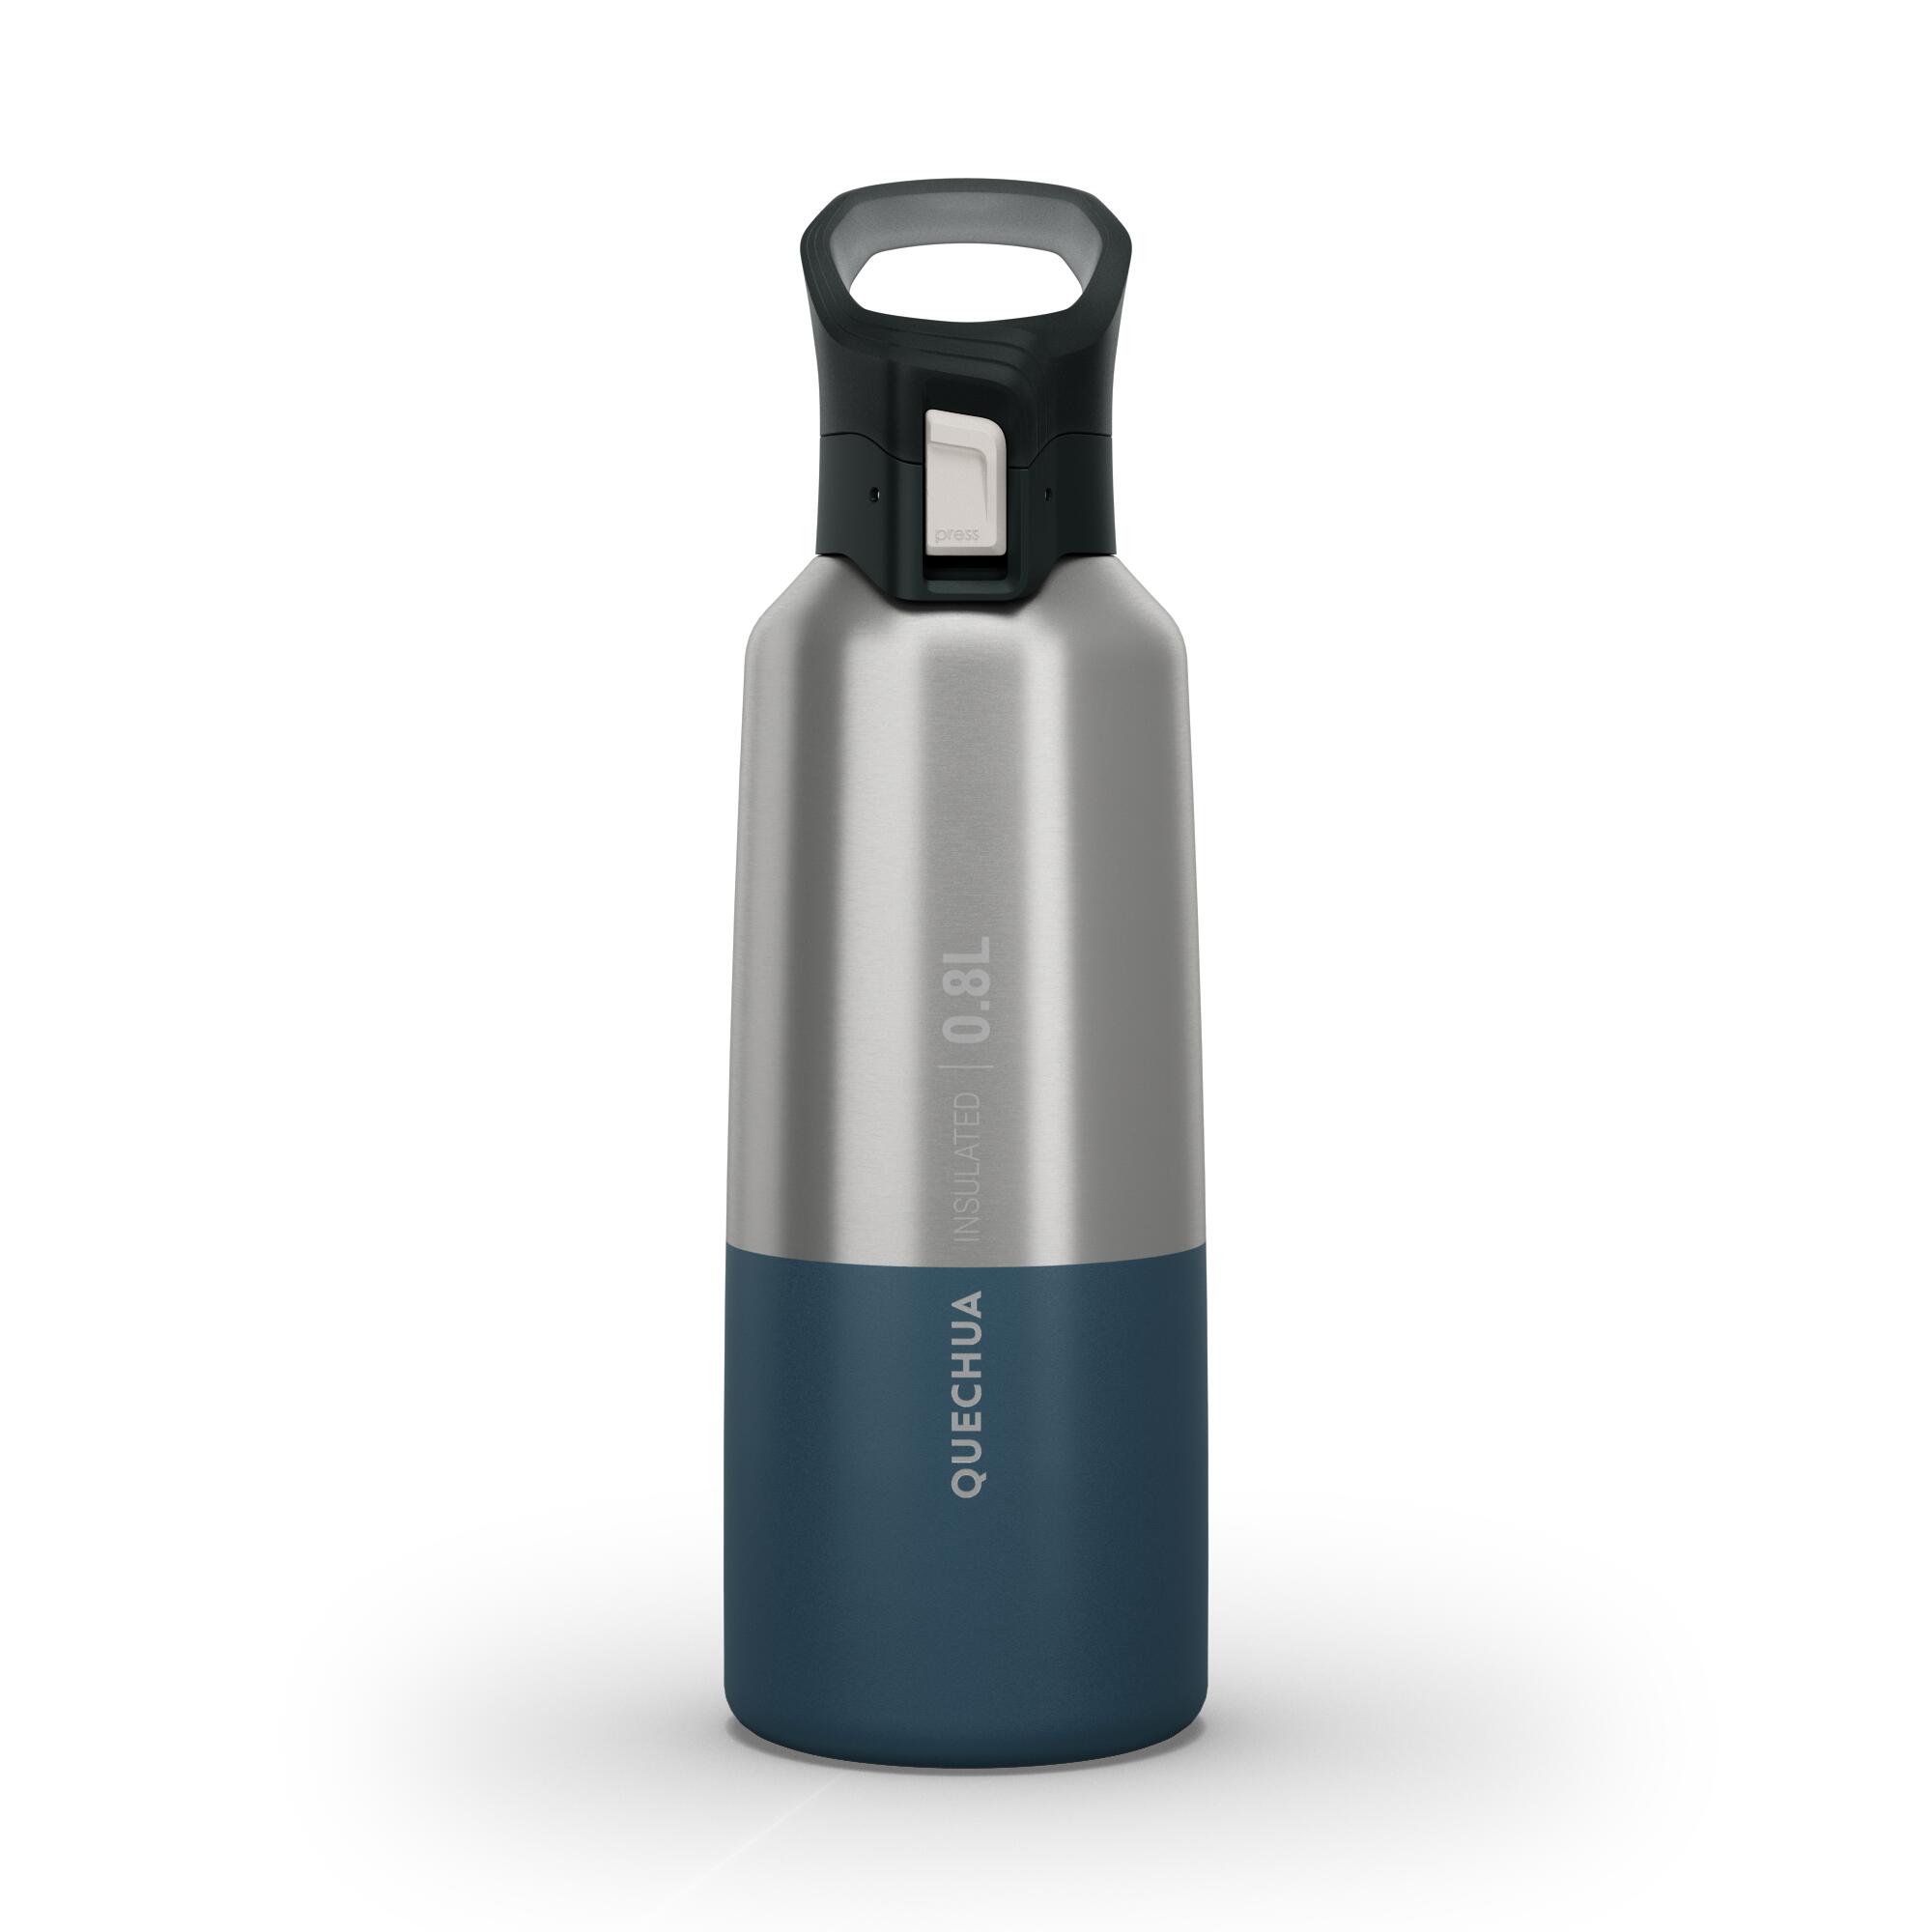 0.8 L stainless steel isothermal water bottle with quick-release cap for hiking  21/31